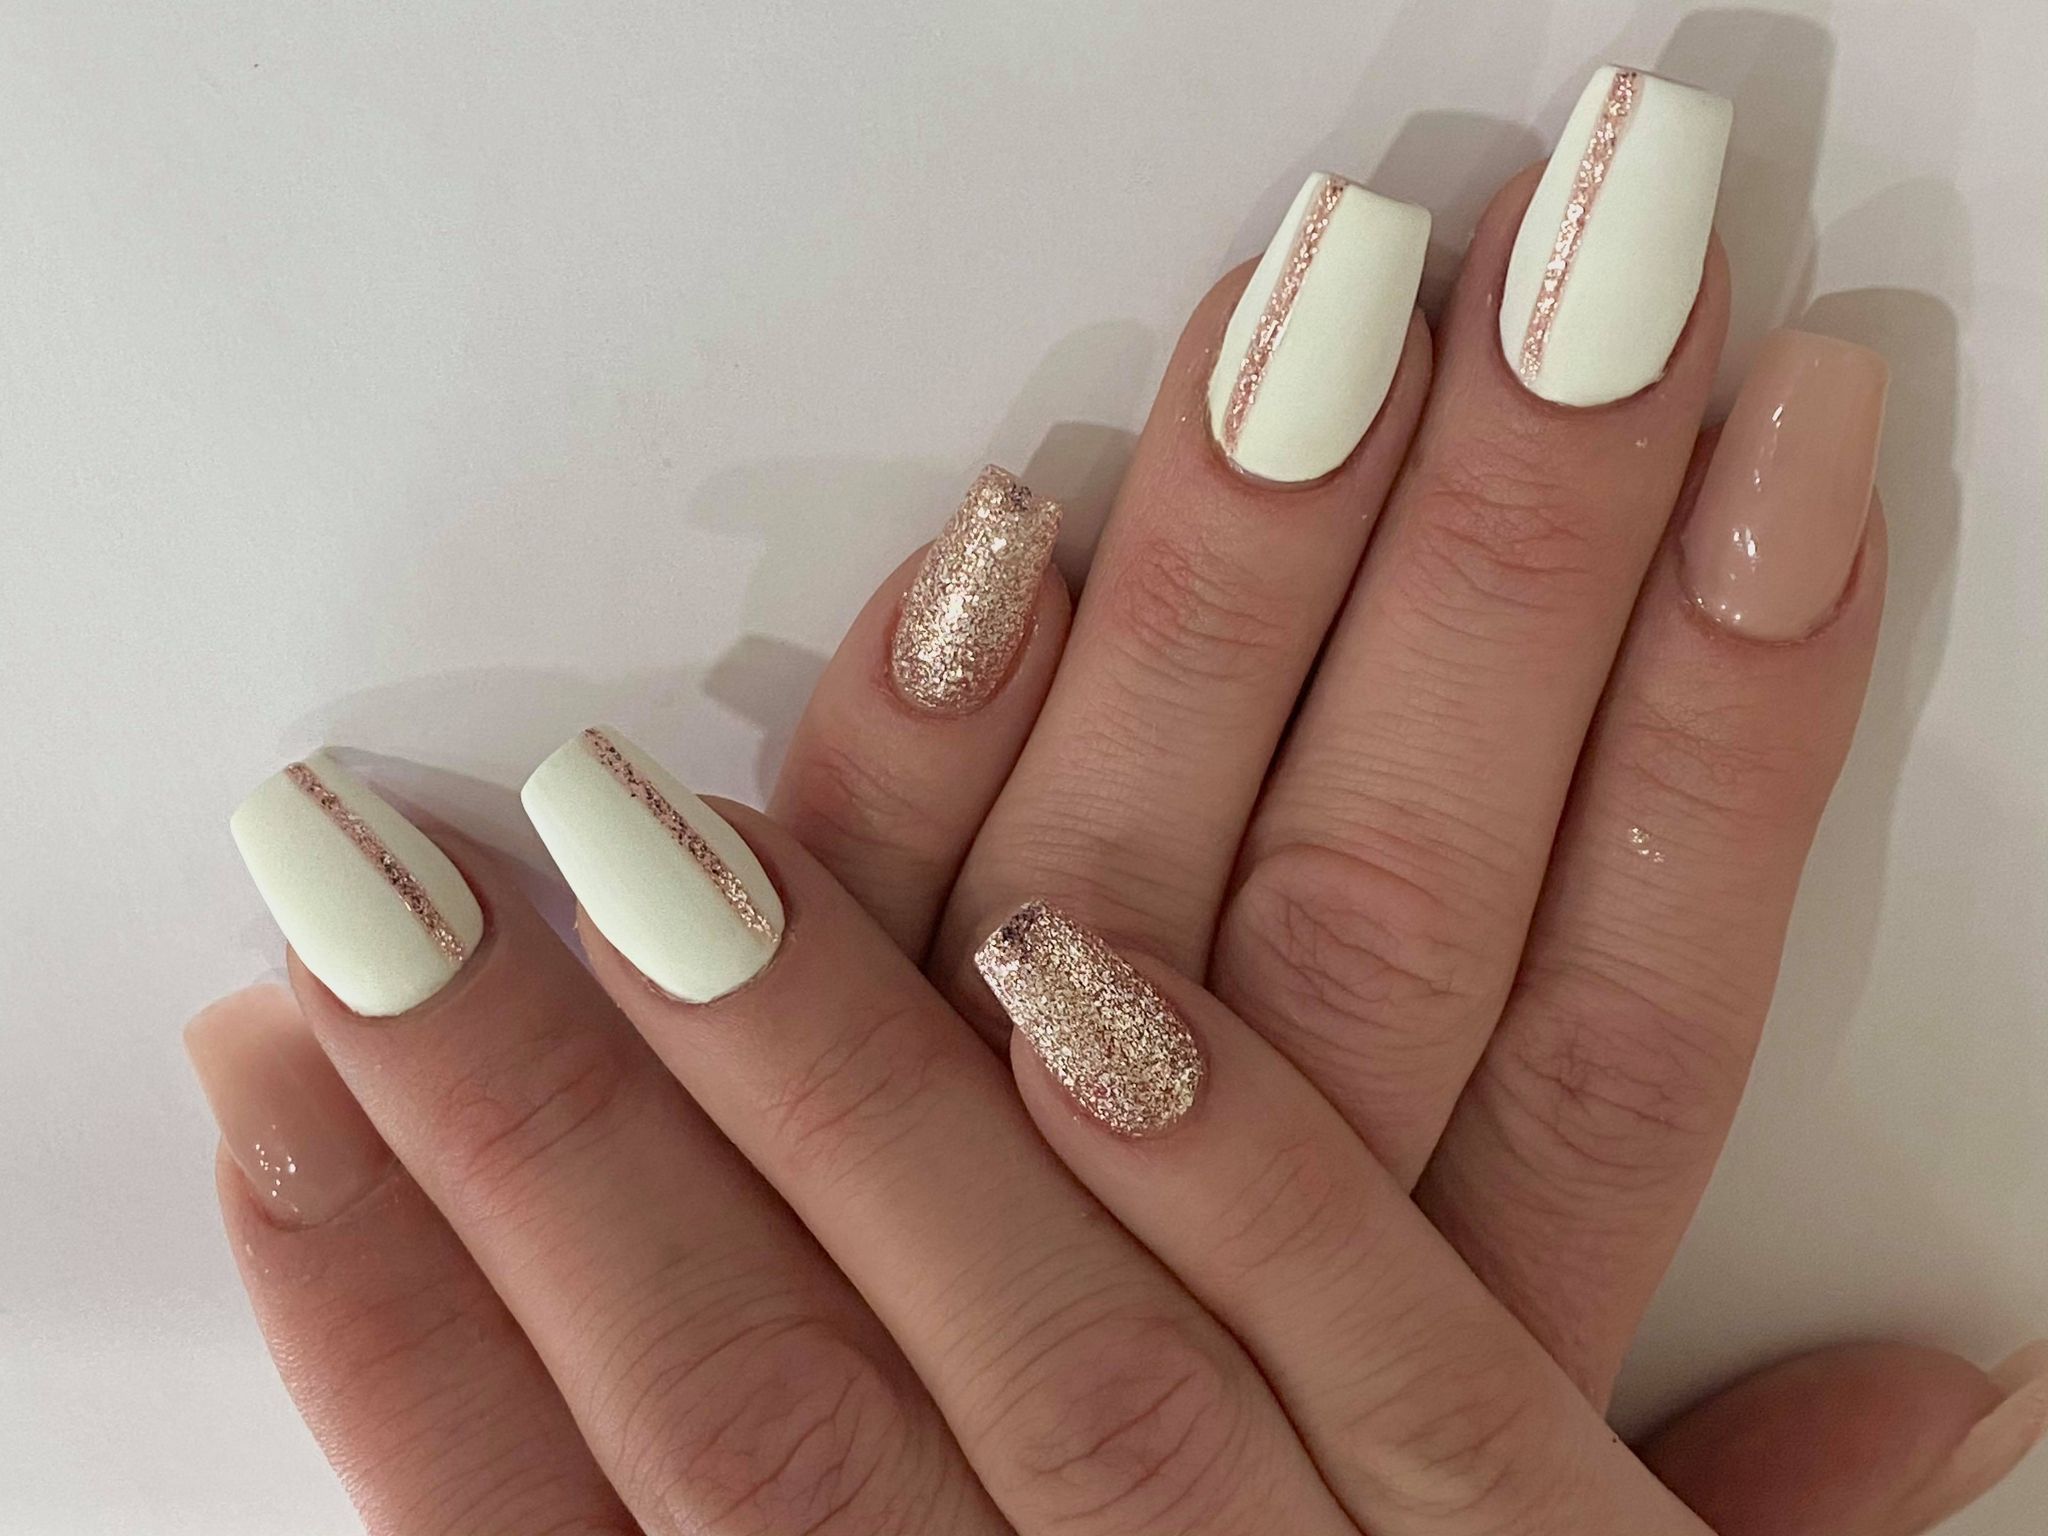 These nails work for weddings as well as for every day.